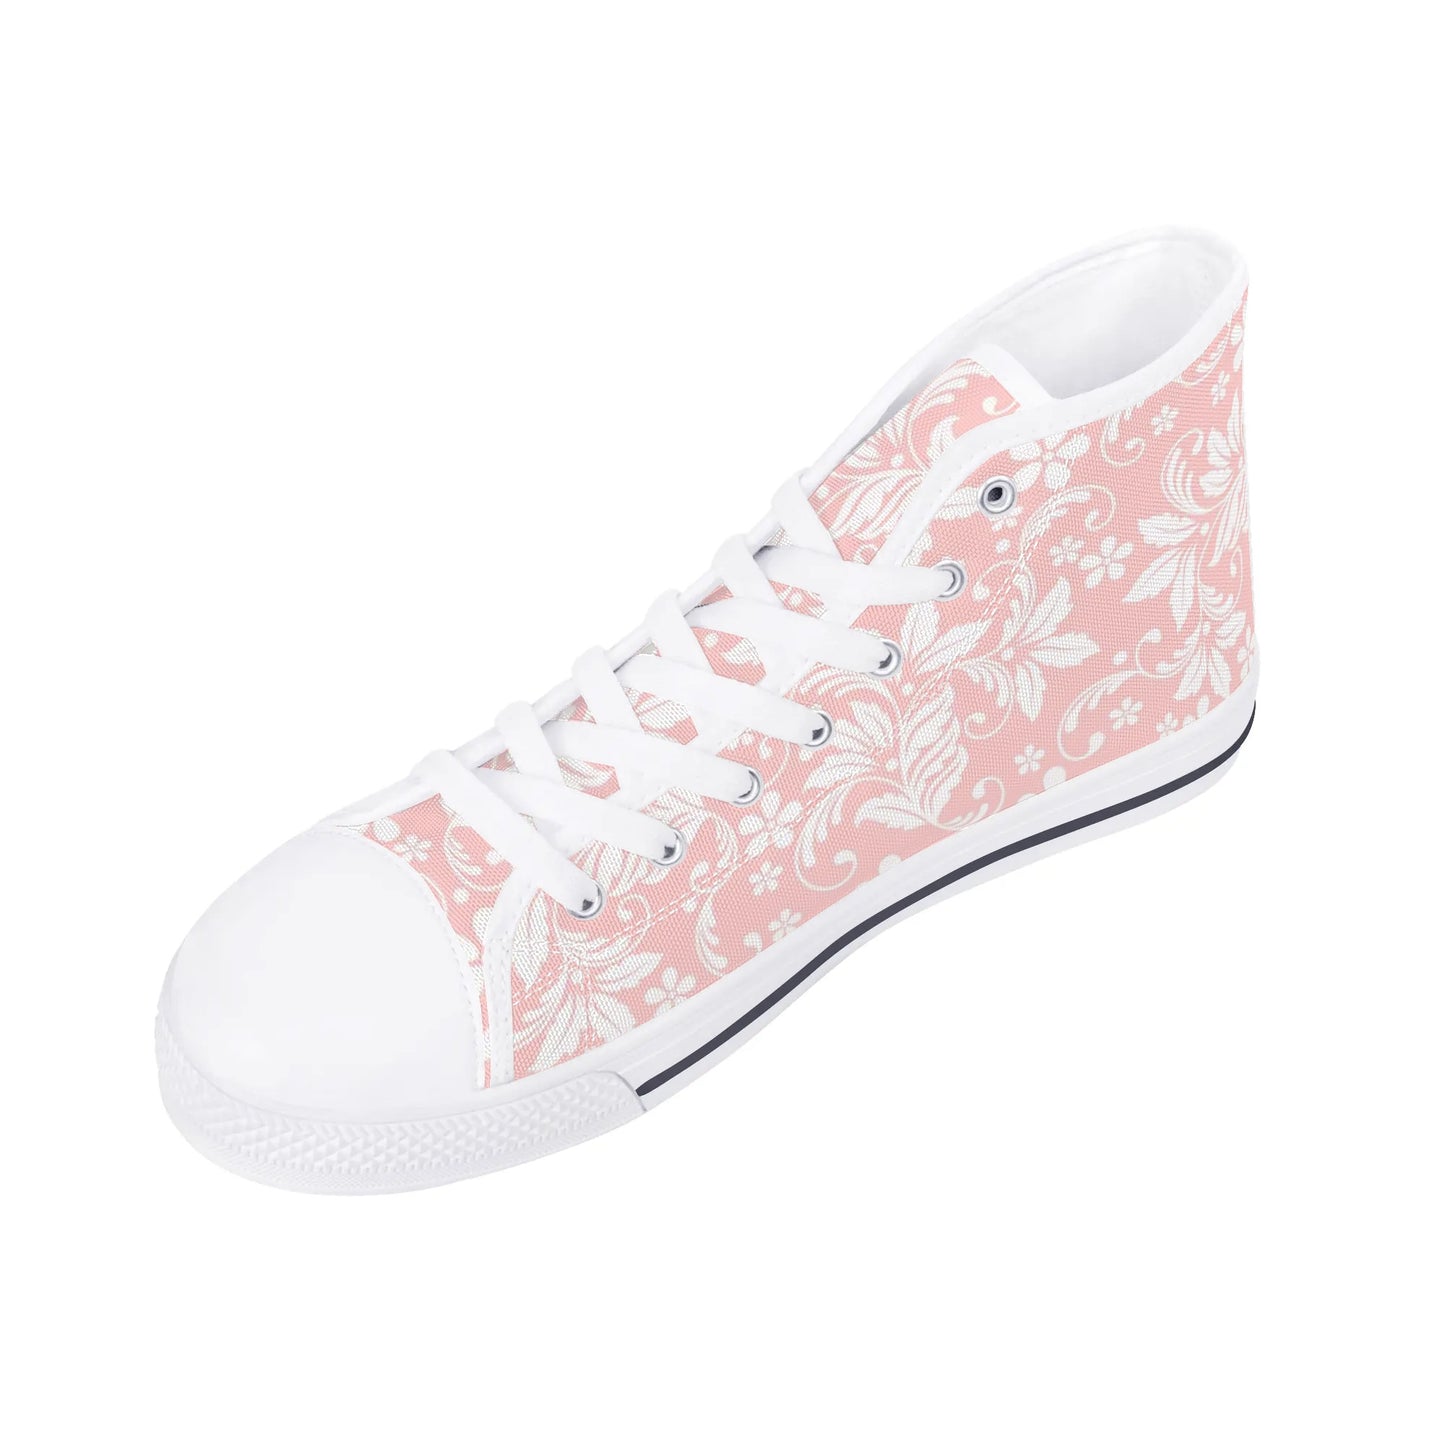 Pink Floral Women High Top Shoes, Flowers Lace Up Sneakers Footwear Canvas Streetwear Ladies Girls White Trainers Designer Gift